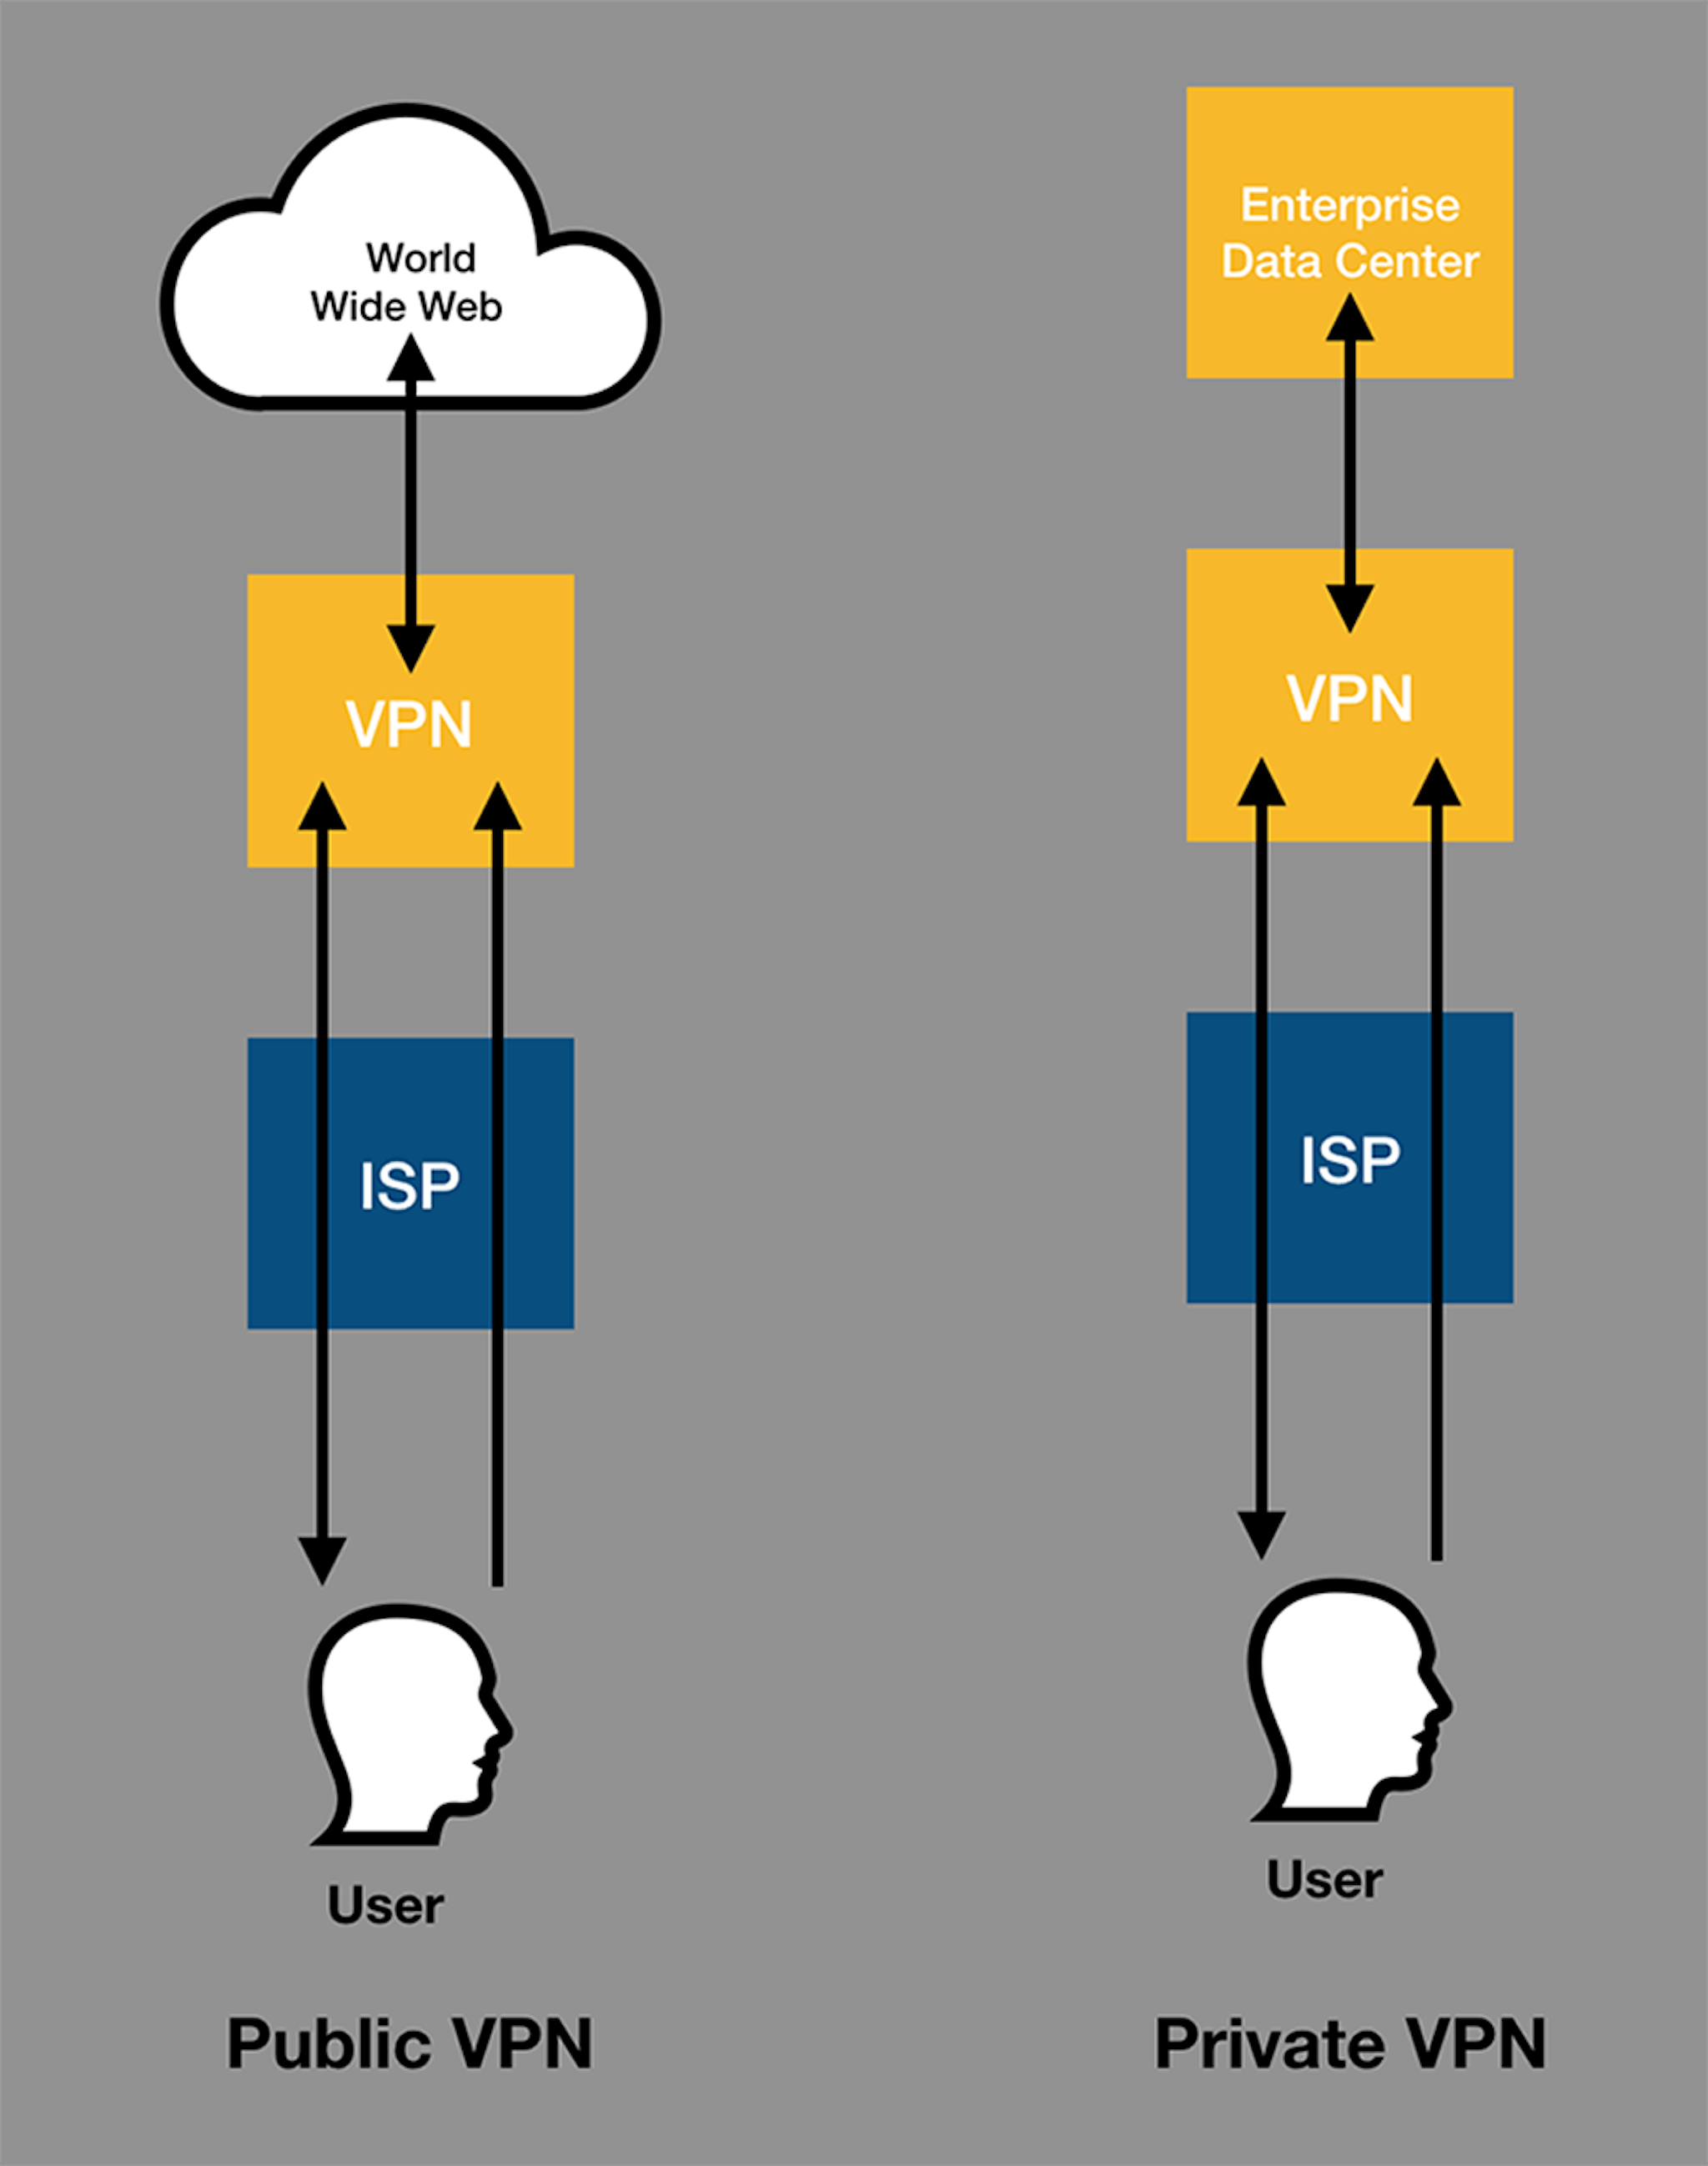 Figure 1. Public VPN (L) and Private VPN (R). You can still use a public VPN to access an enterprise network, but a private VPN provides tighter security. A user must still connect using their Internet service provider (ISP), but a VPN uses its own IP address for the user. Most private VPNs are used by remote workers and offices connecting to a company's enterprise network. Public VPNs are used more for hiding a user's identity while browsing the web and accessing websites that are restricted in a particular region or network.